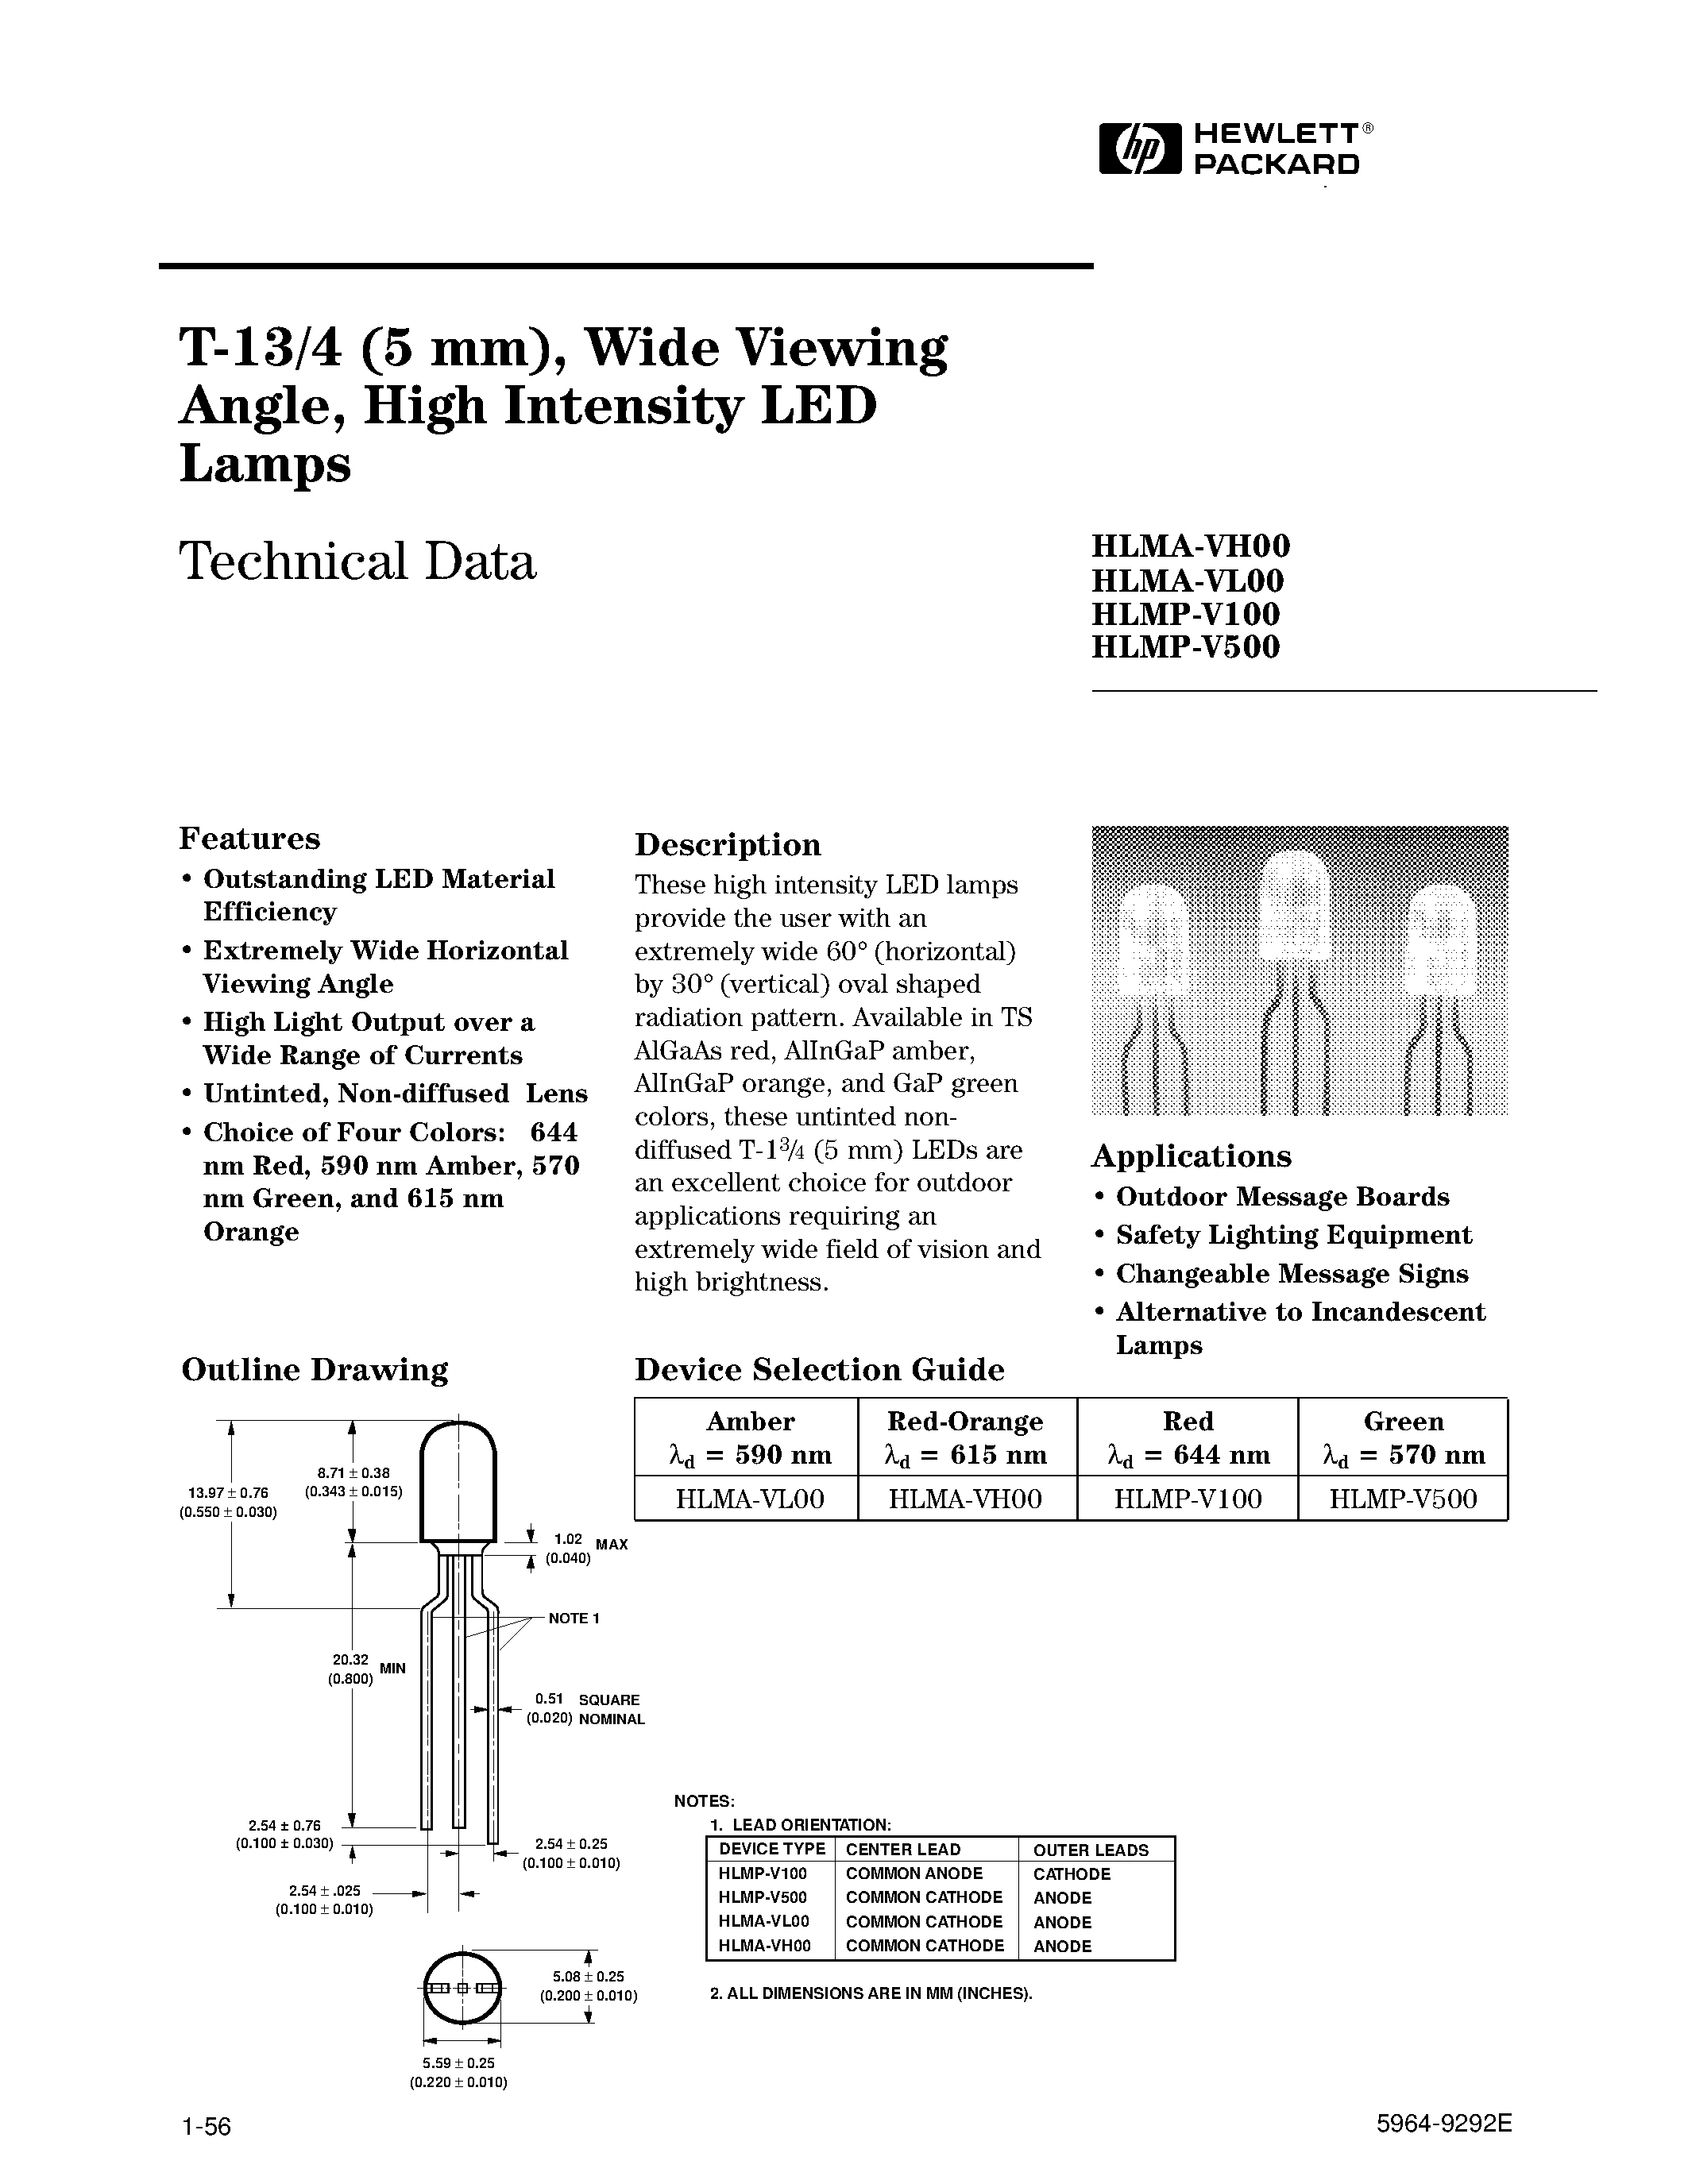 Datasheet HLMP-V500 - T-13/4 (5 mm)/ Wide Viewing Angle/ High Intensity LED Lamps page 1